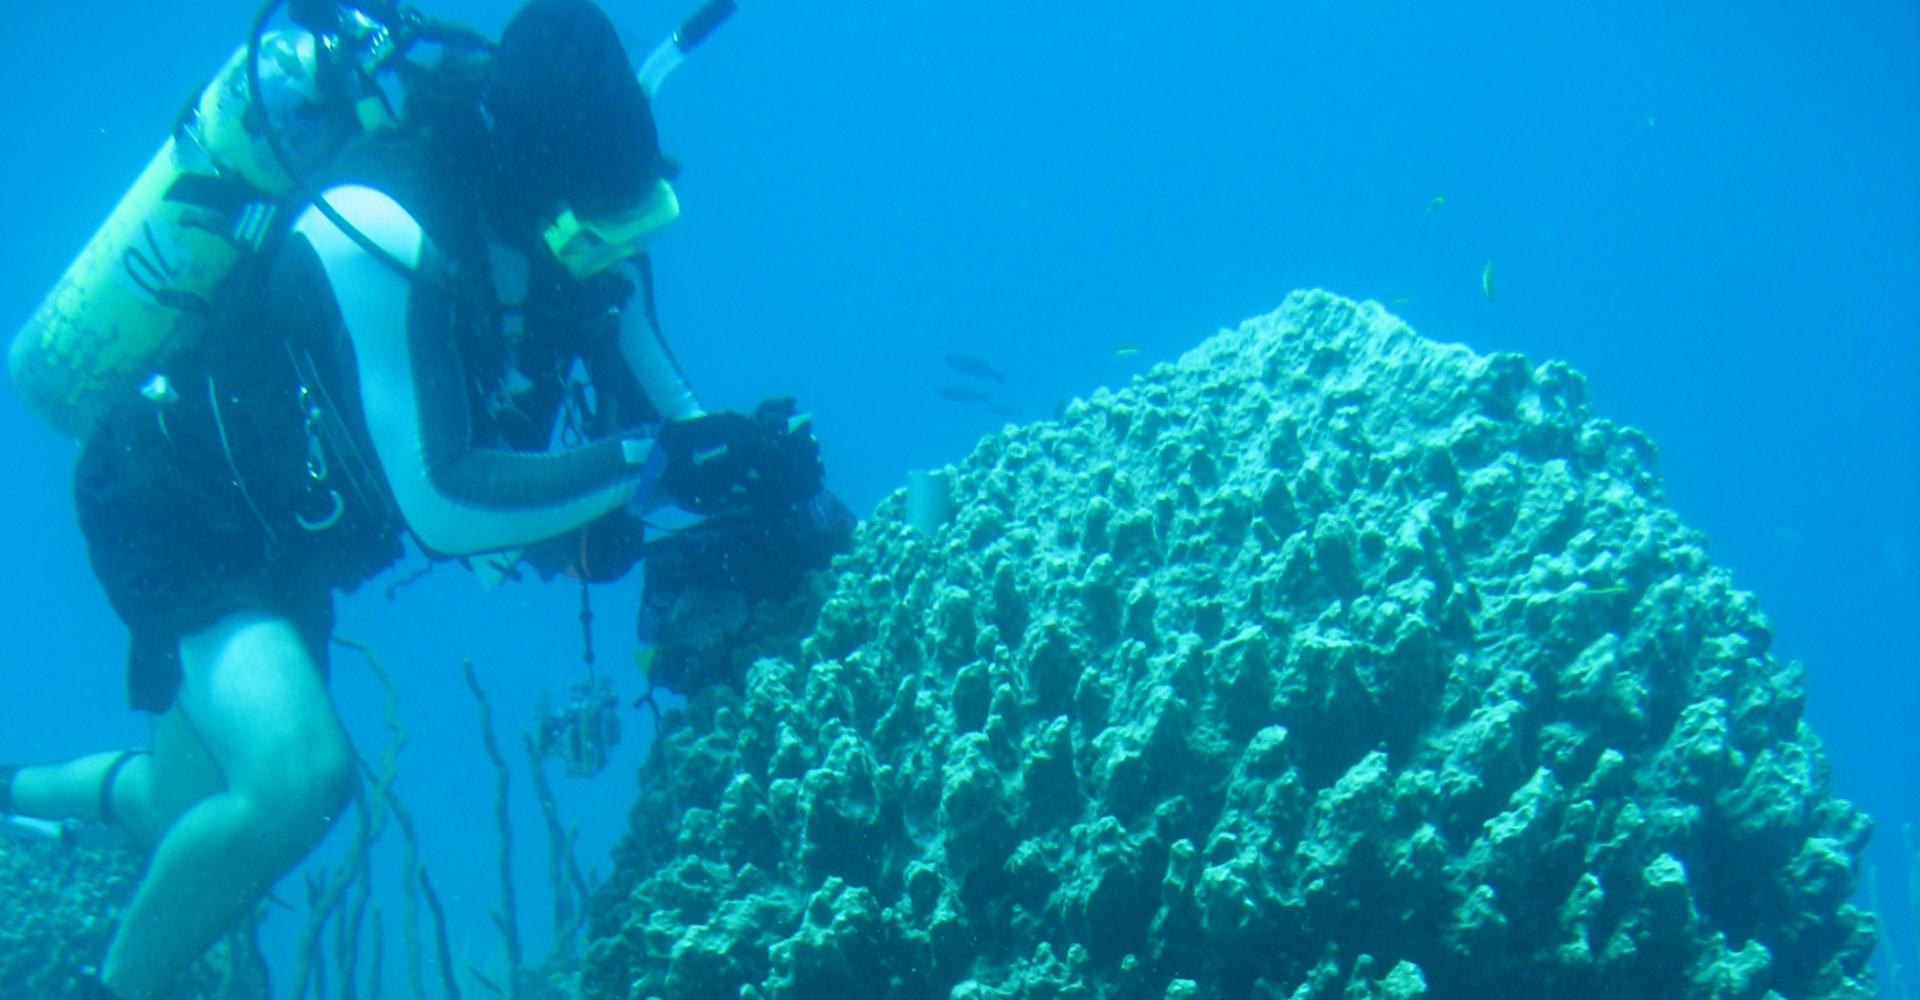 Jan dives on reef with sponges